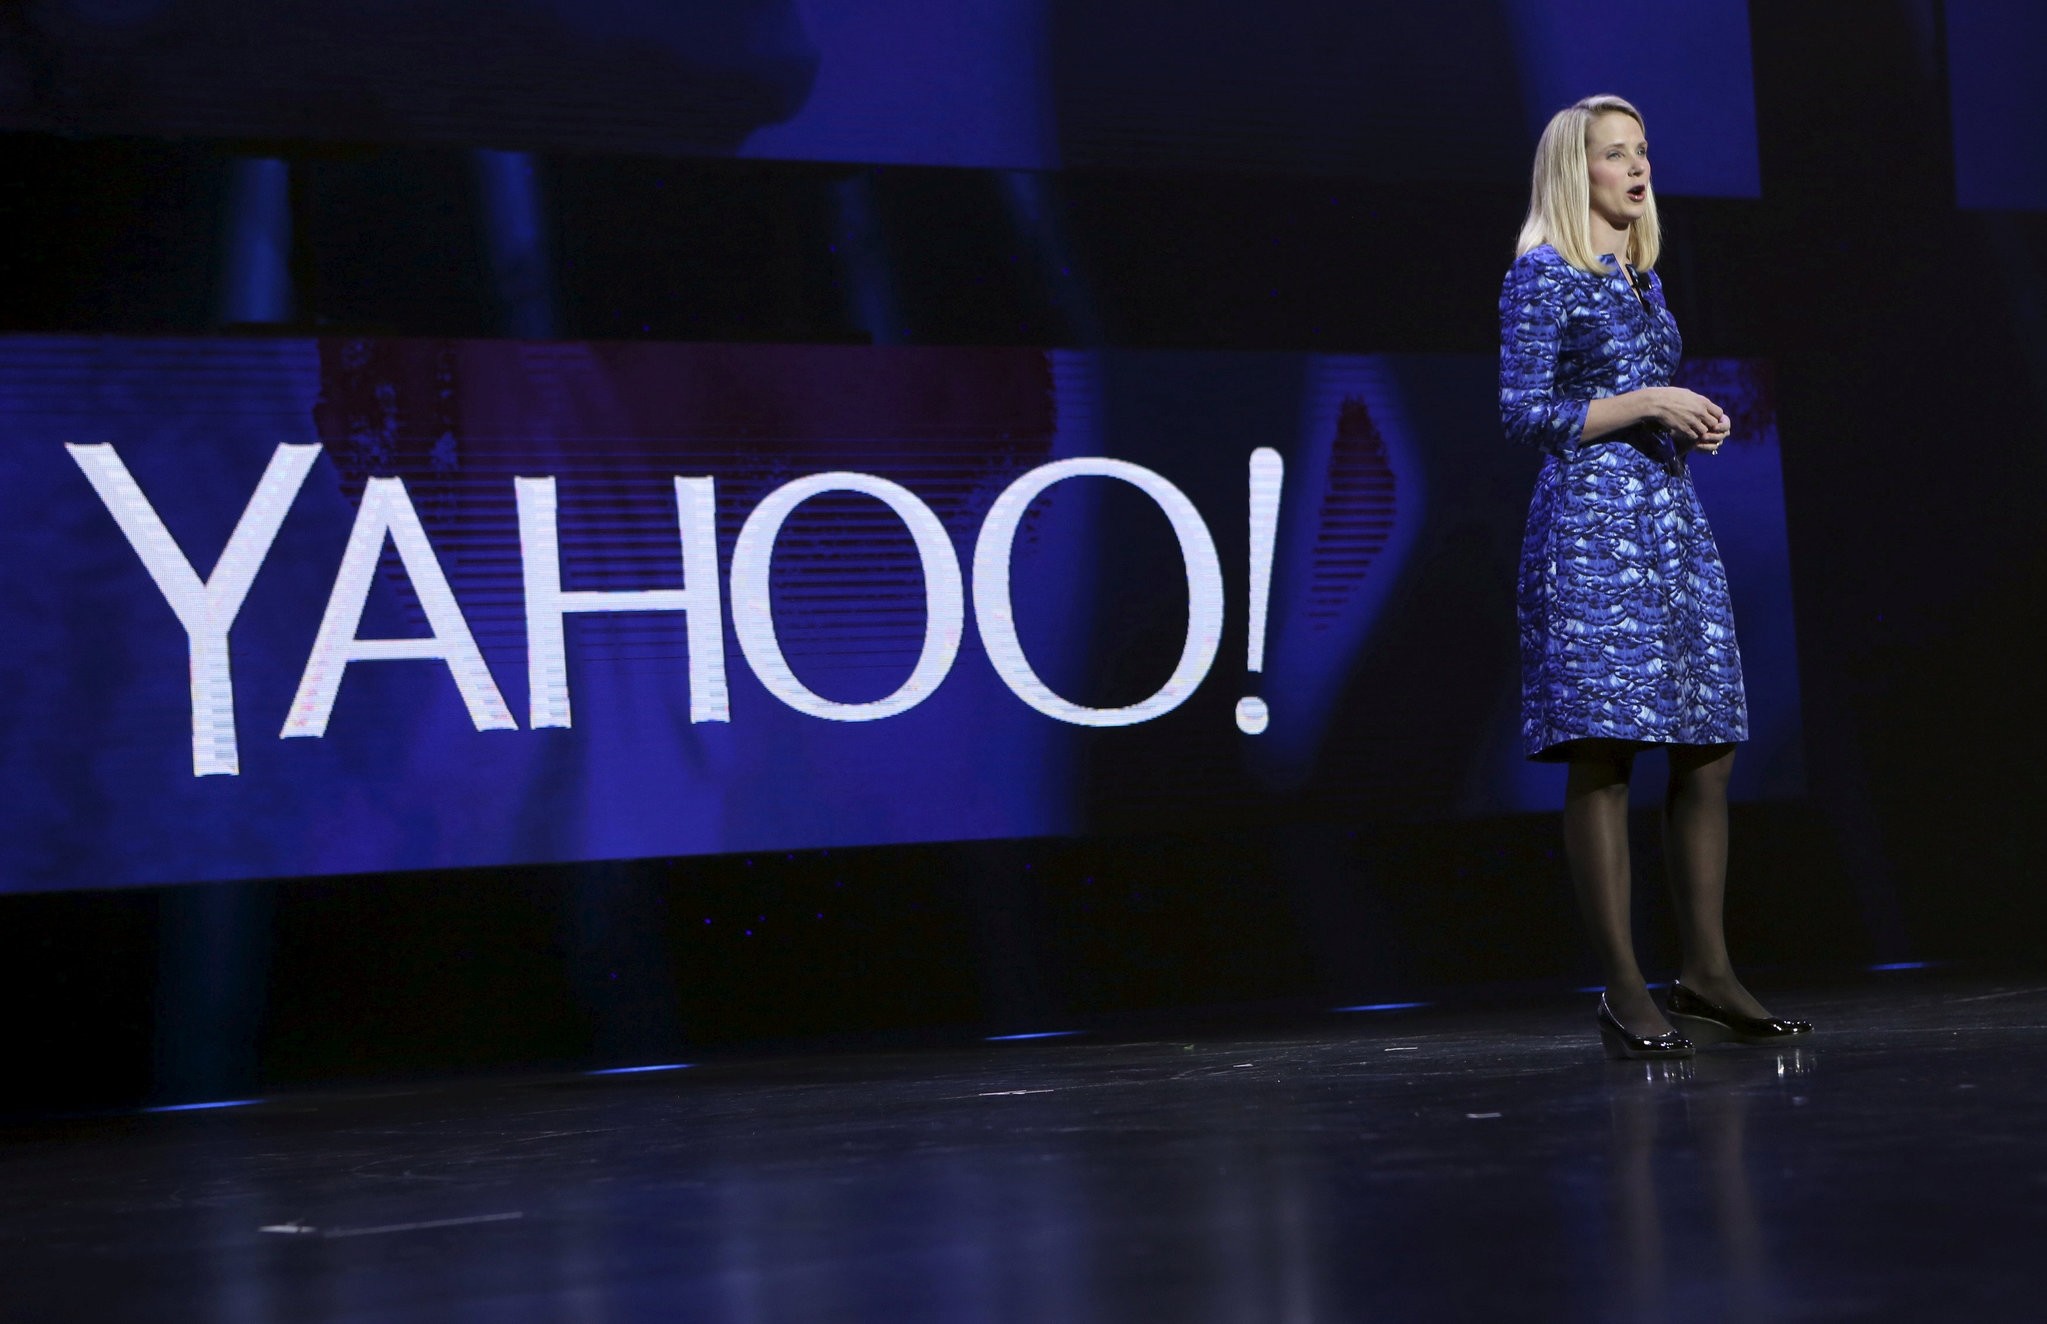 Yahoo CEO Marissa Mayer delivers her keynote address at the annual Consumer Electronics Show (CES) in Las Vegas, Nevada in 2014.